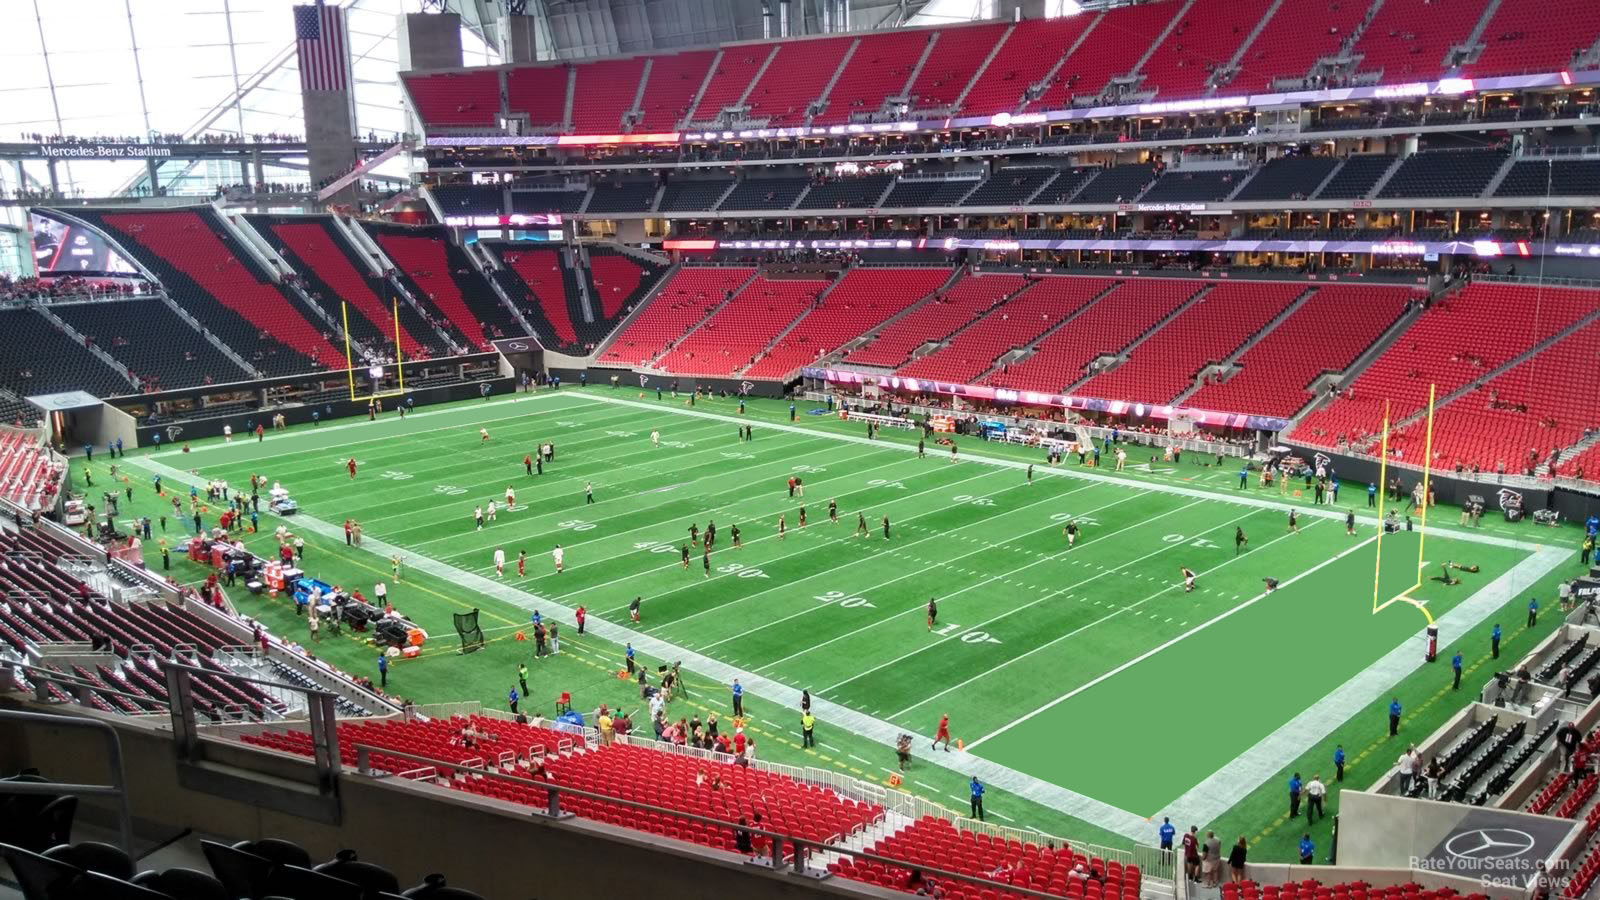 section 230, row 6 seat view  for football - mercedes-benz stadium